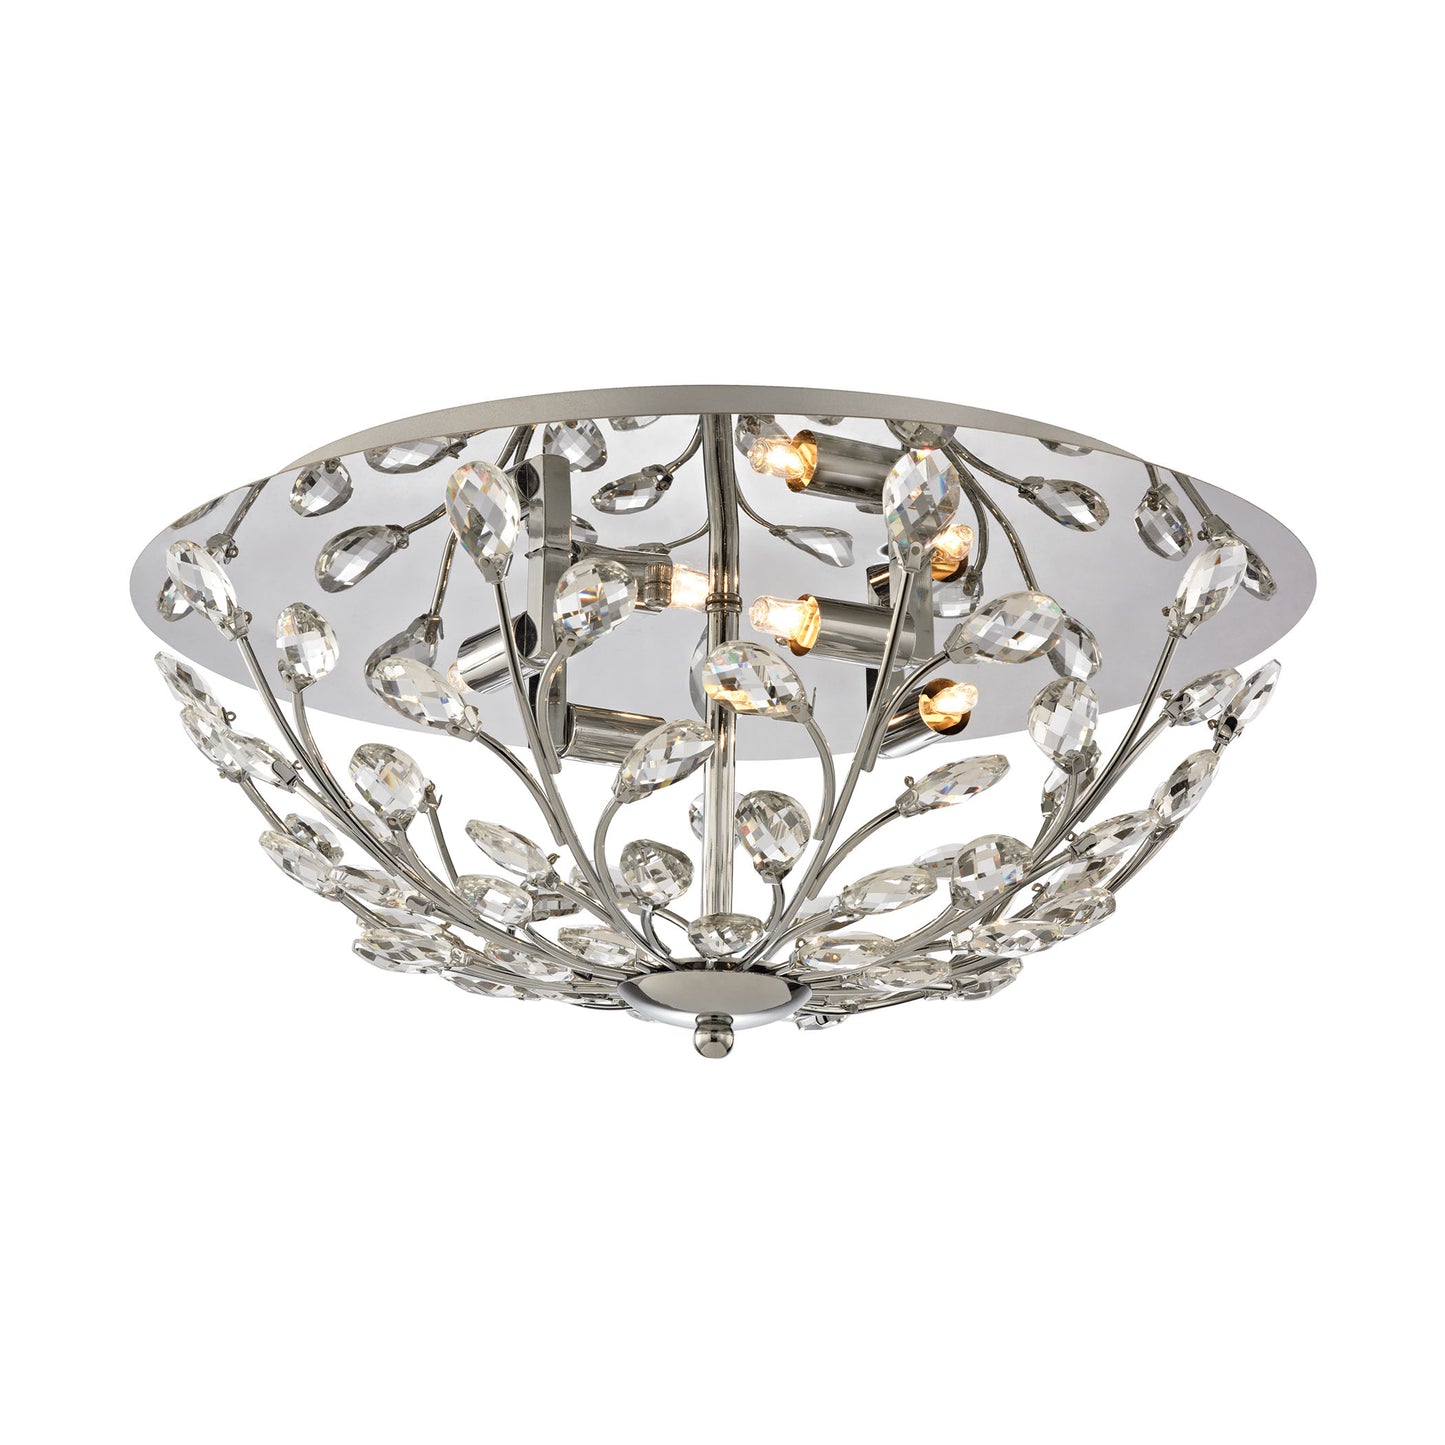 ELK Lighting 45261/4 - Crystique 17" Wide 4-Light Flush Mount in Polished Chrome with Branch Metalwo